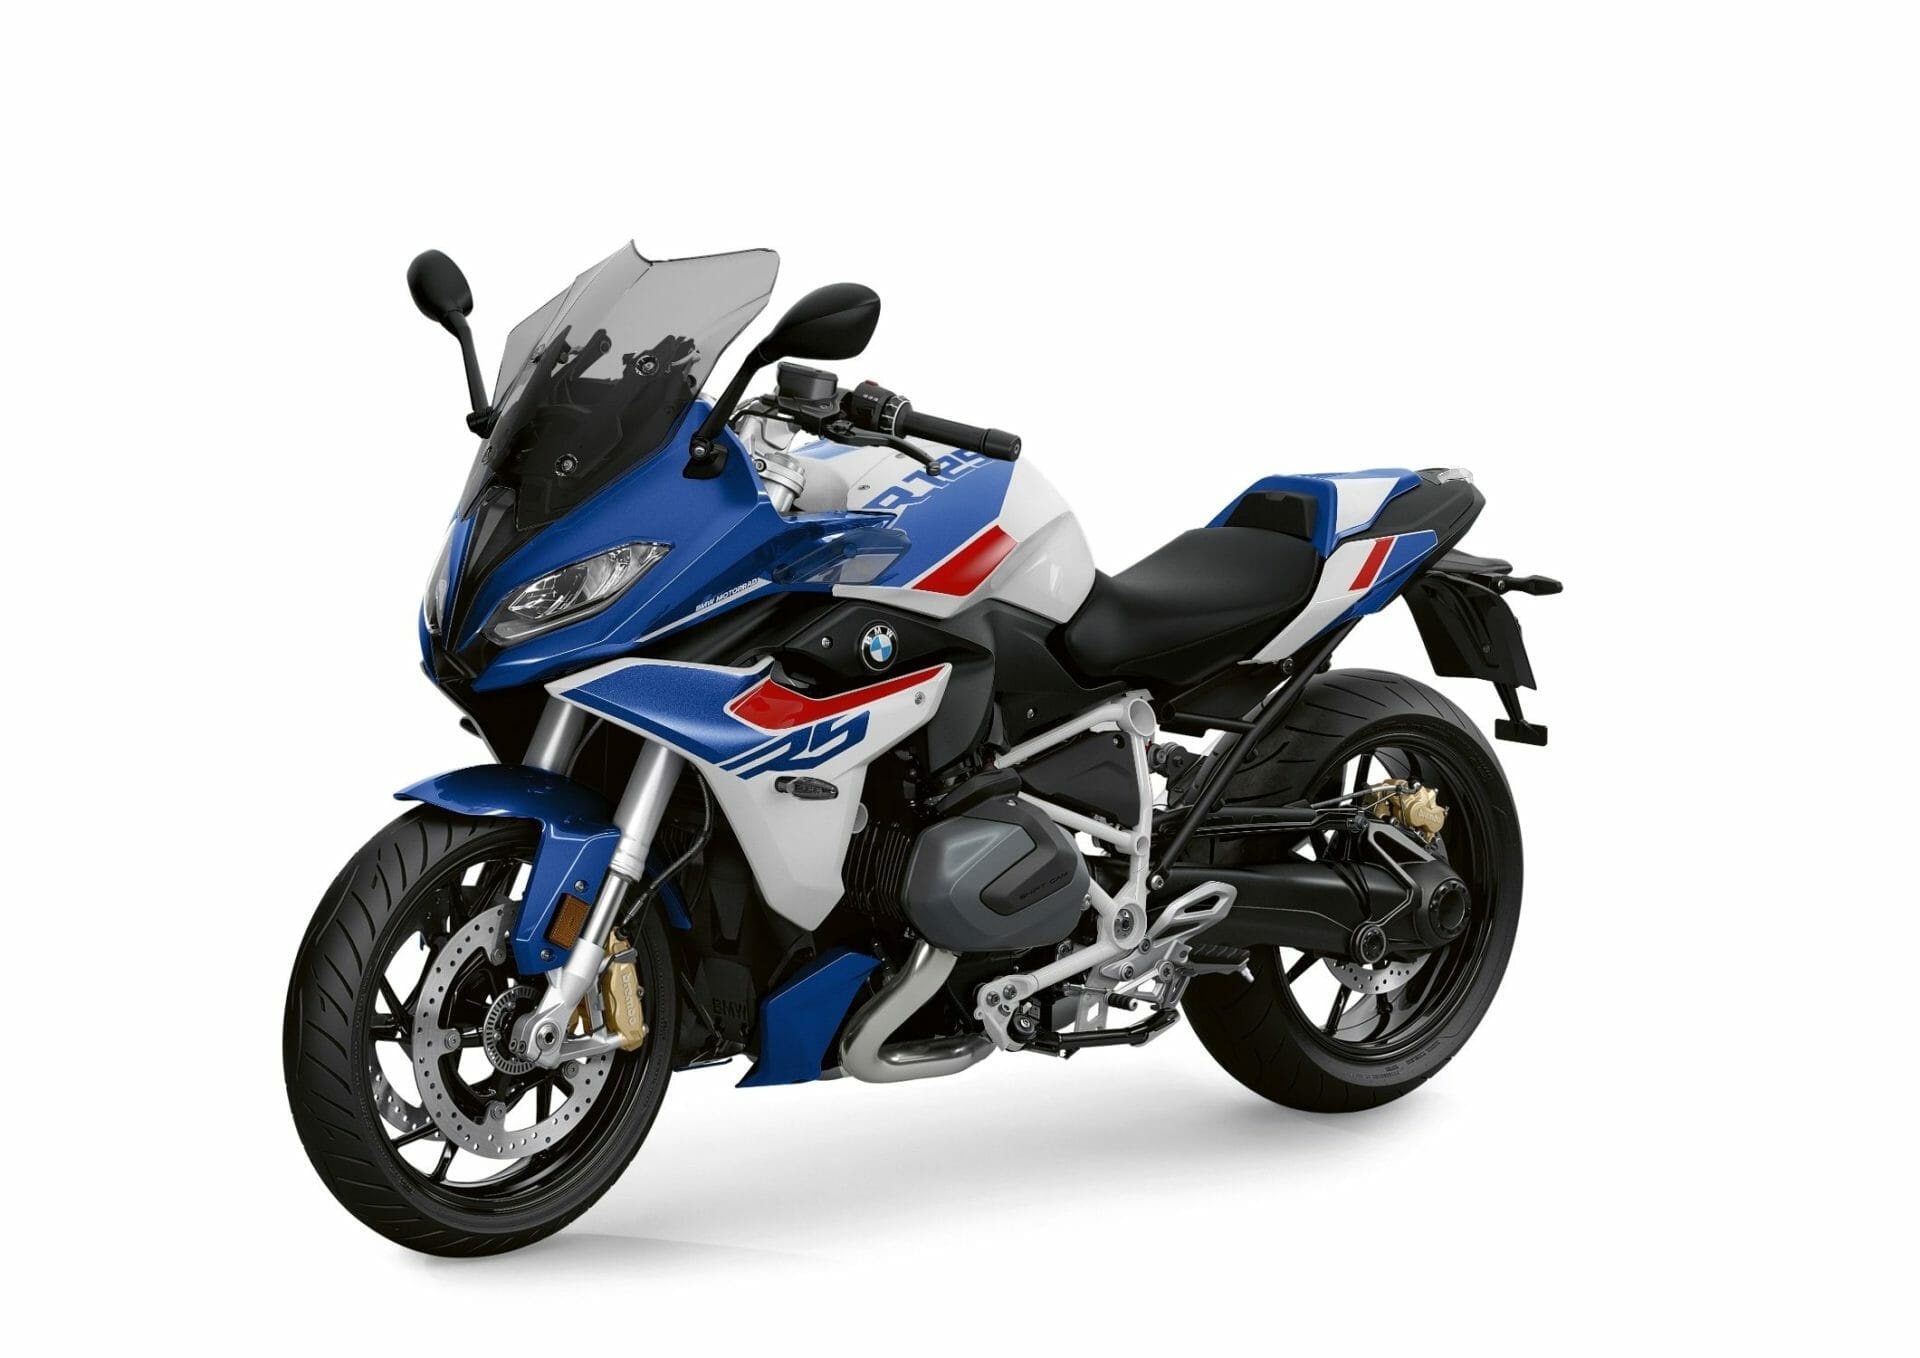 BMW presents revised R 1250 RS - MOTORCYCLES.NEWS